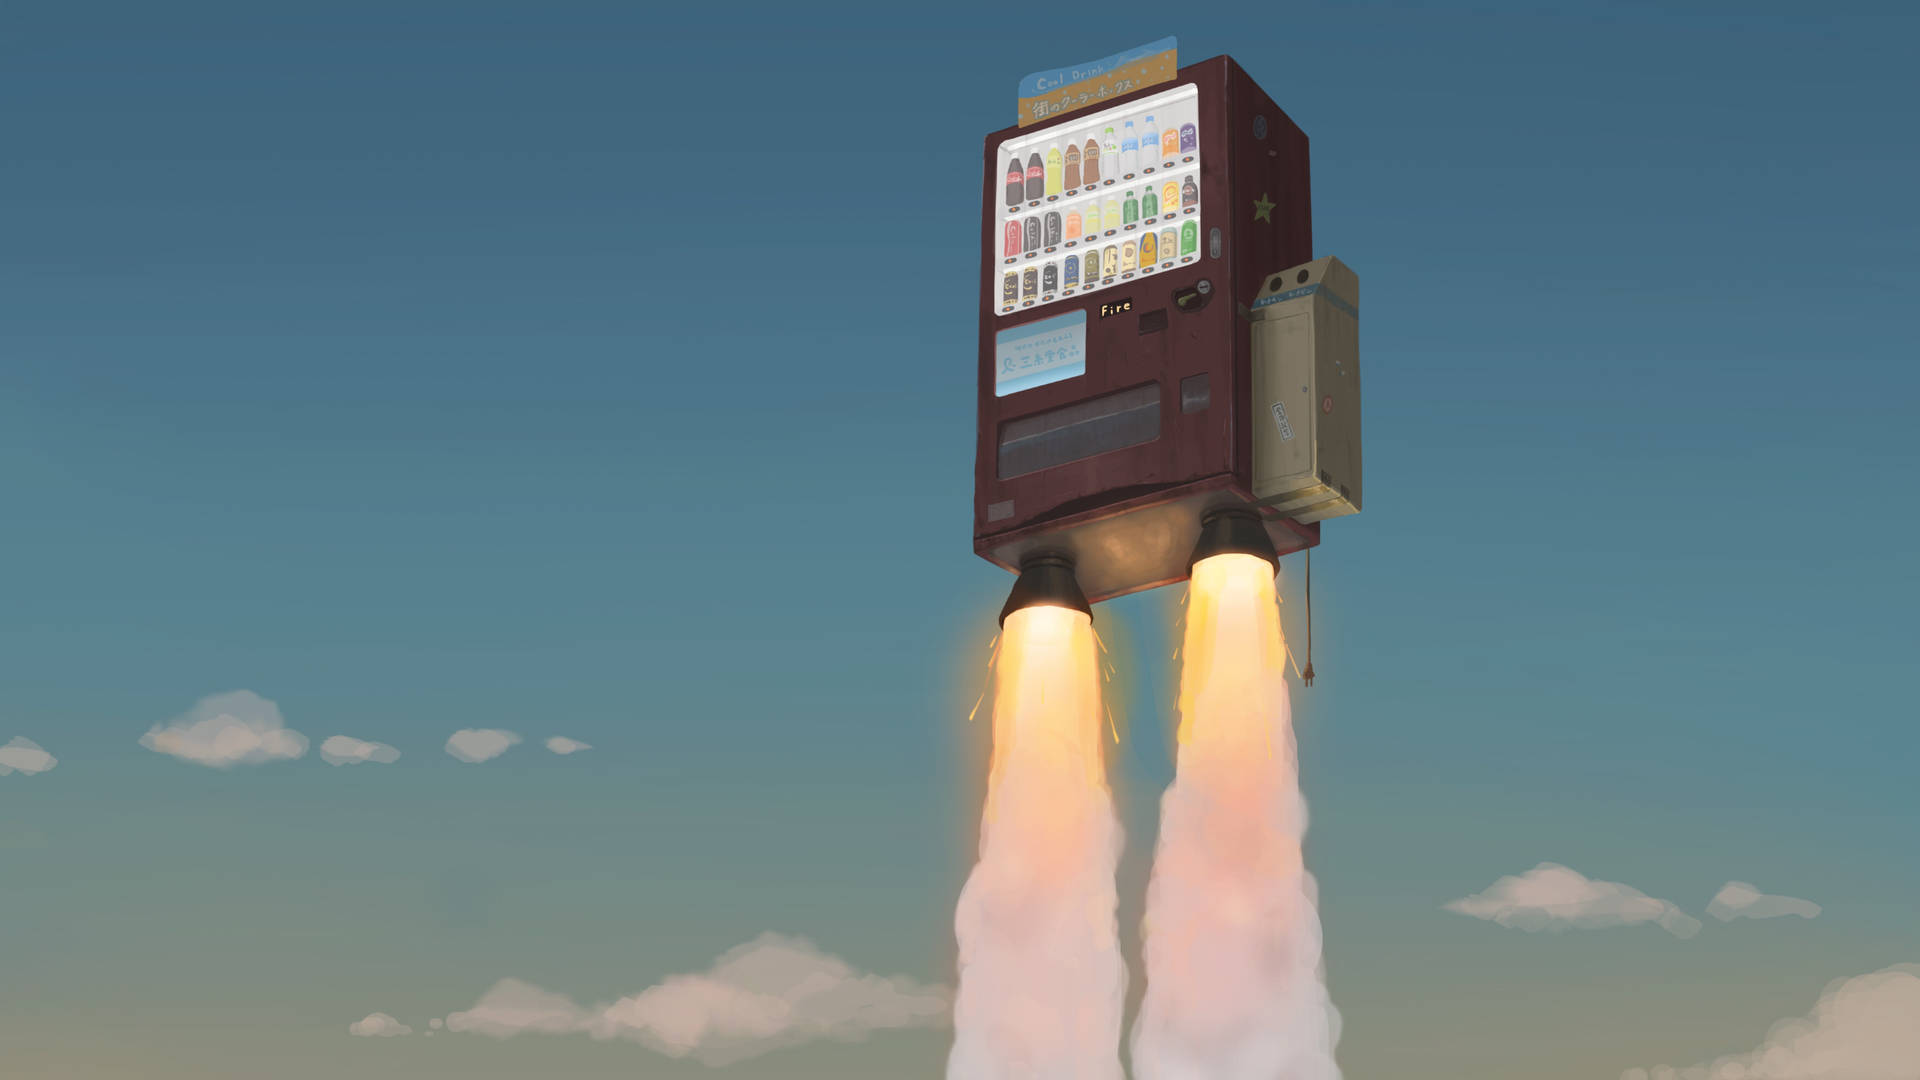 Rocket 2560X1440 Wallpaper and Background Image